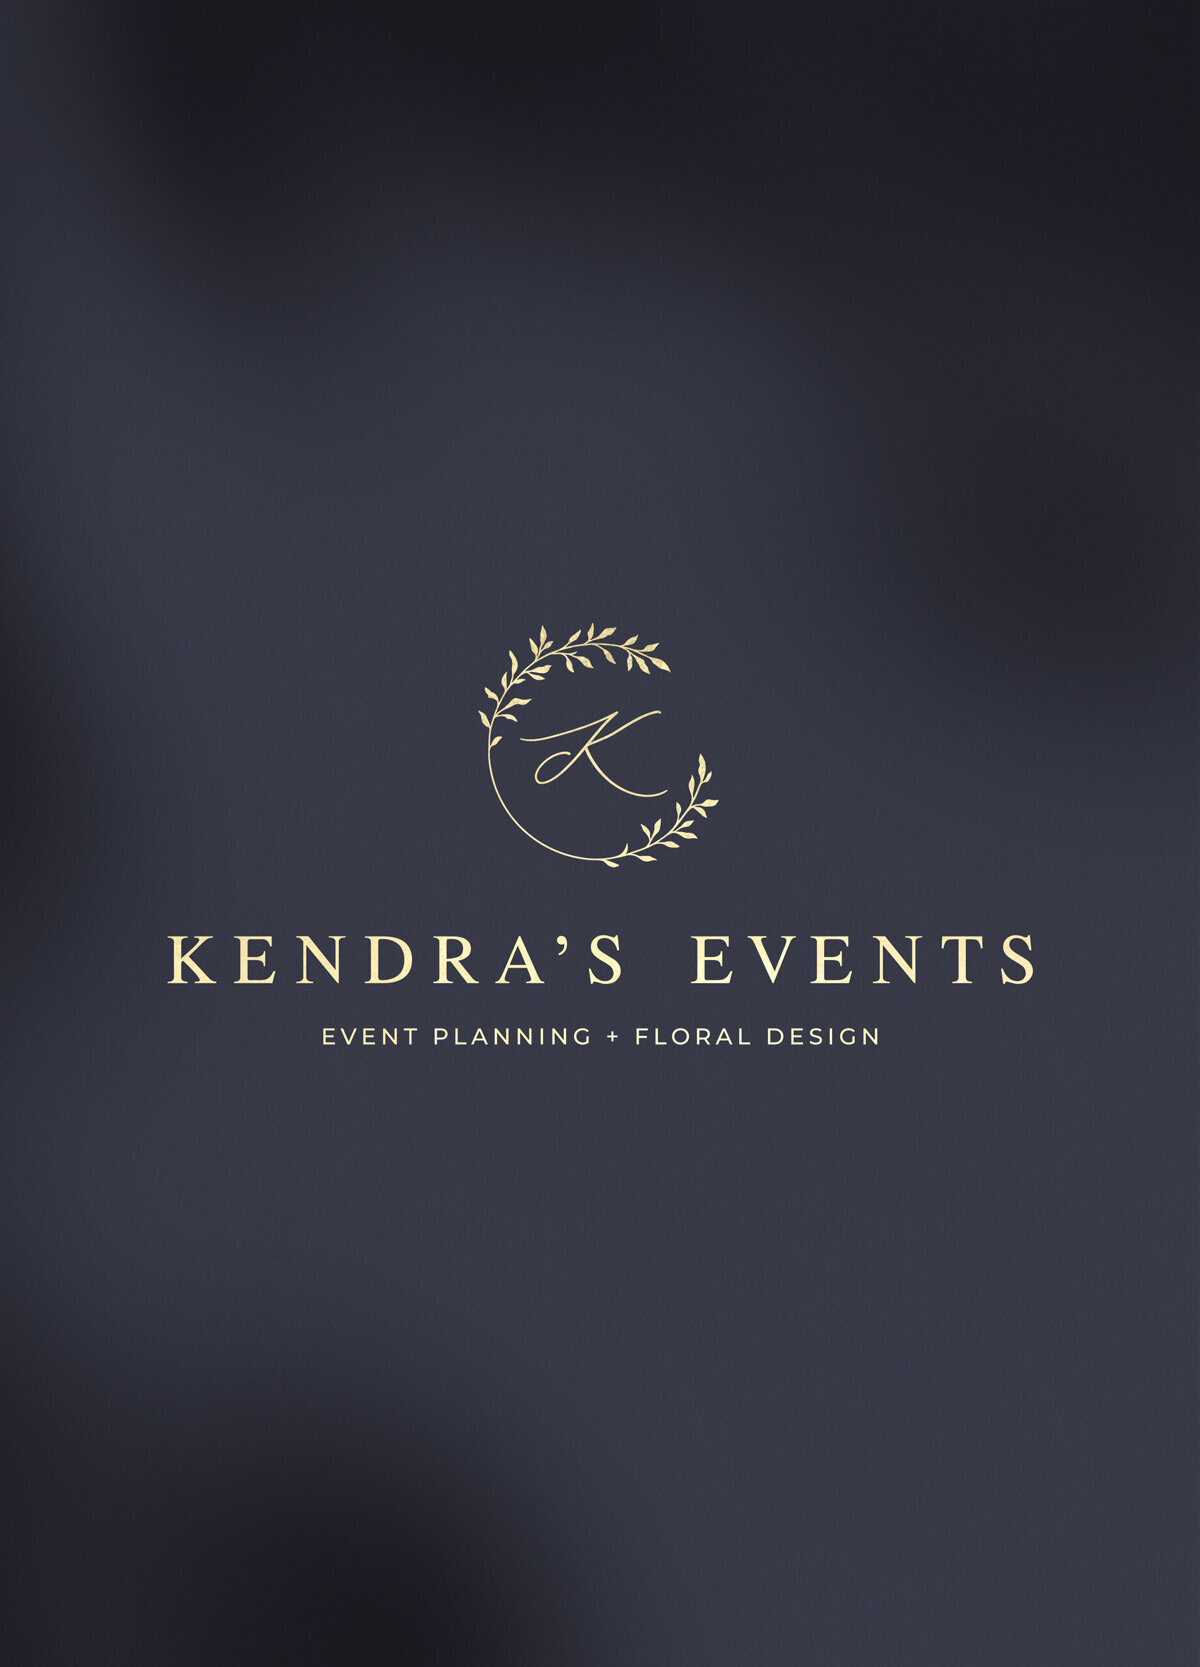 logo design for kendra's events in gold foil